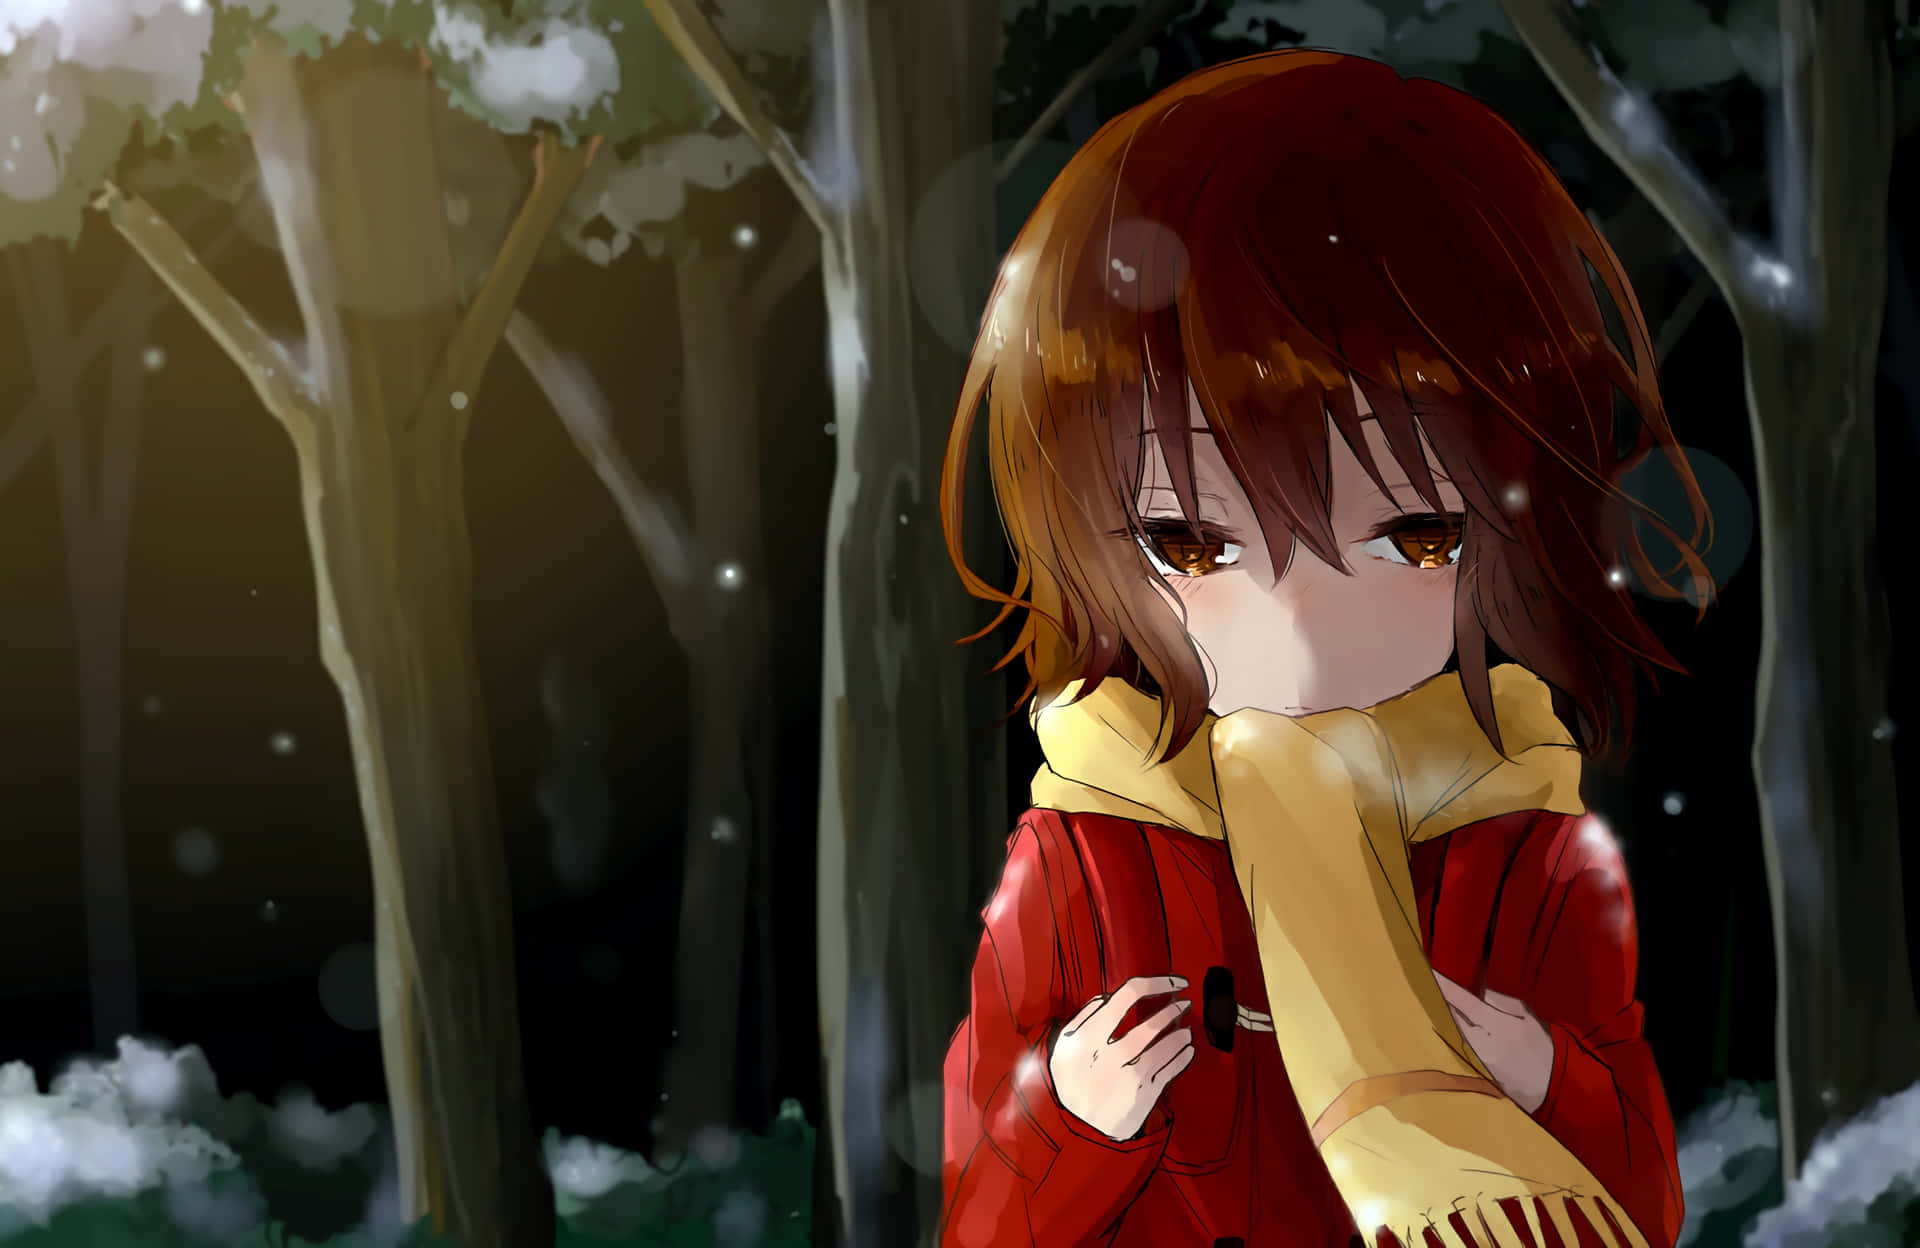 Lonely Winter Moment Anime Style Wallpaper